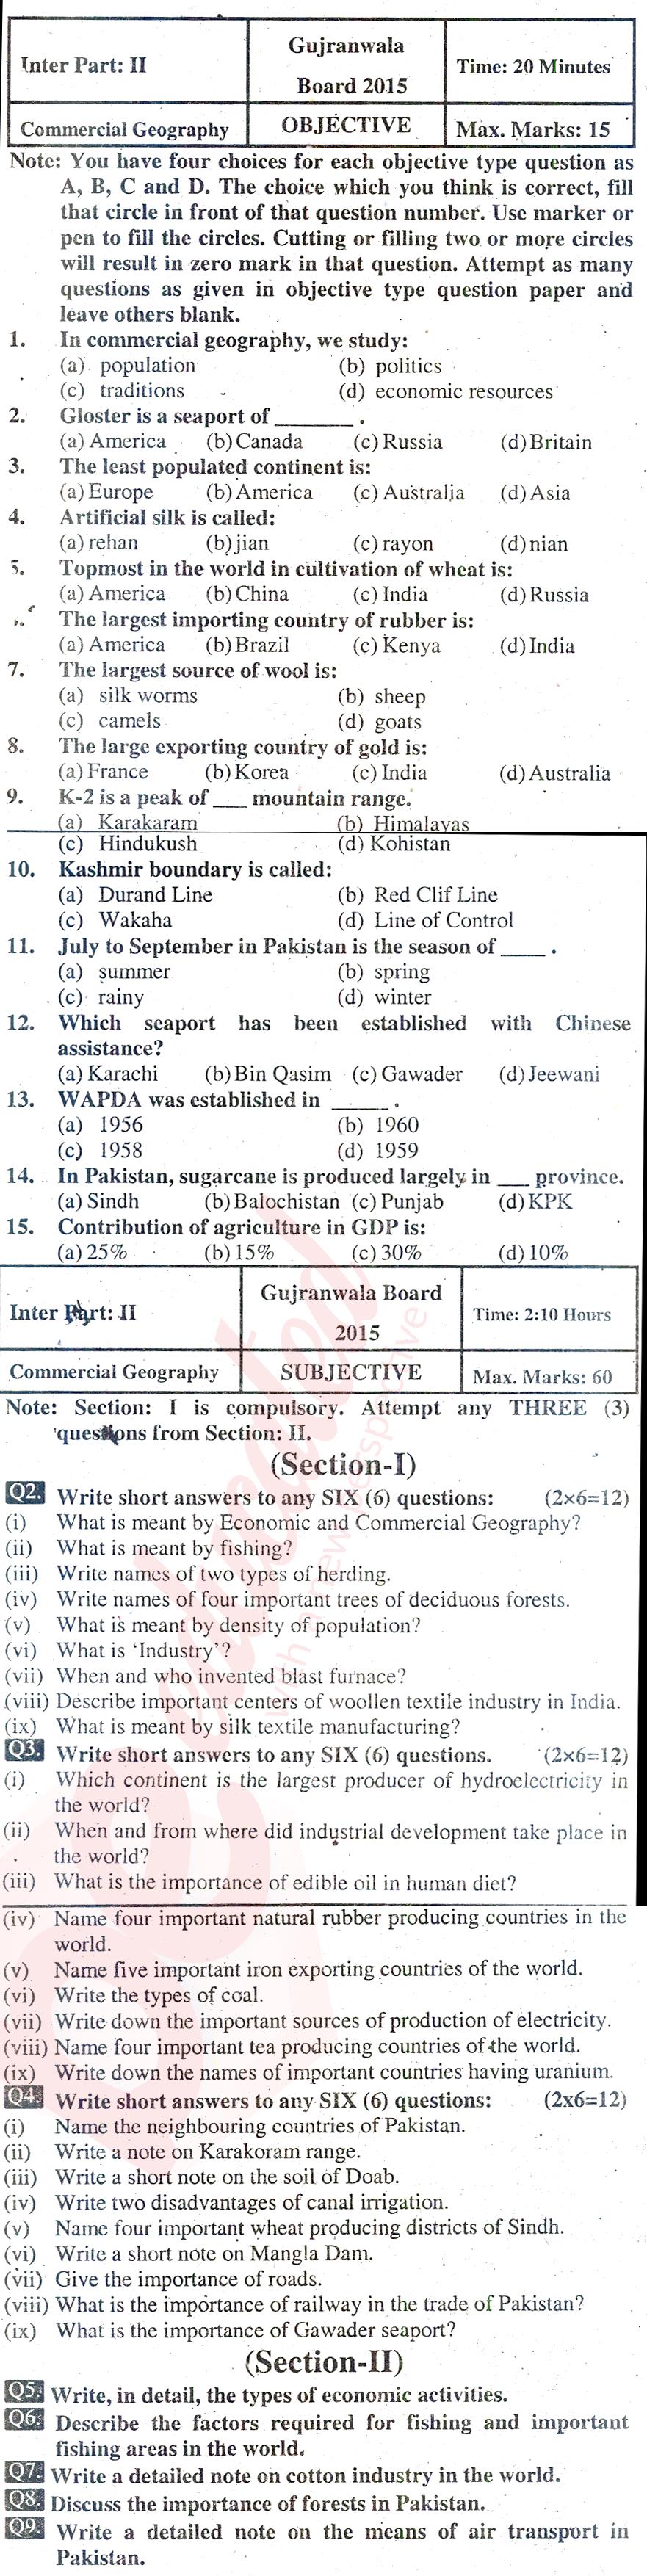 Commercial Geography ICOM Part 2 Past Paper Group 1 BISE Gujranwala 2015